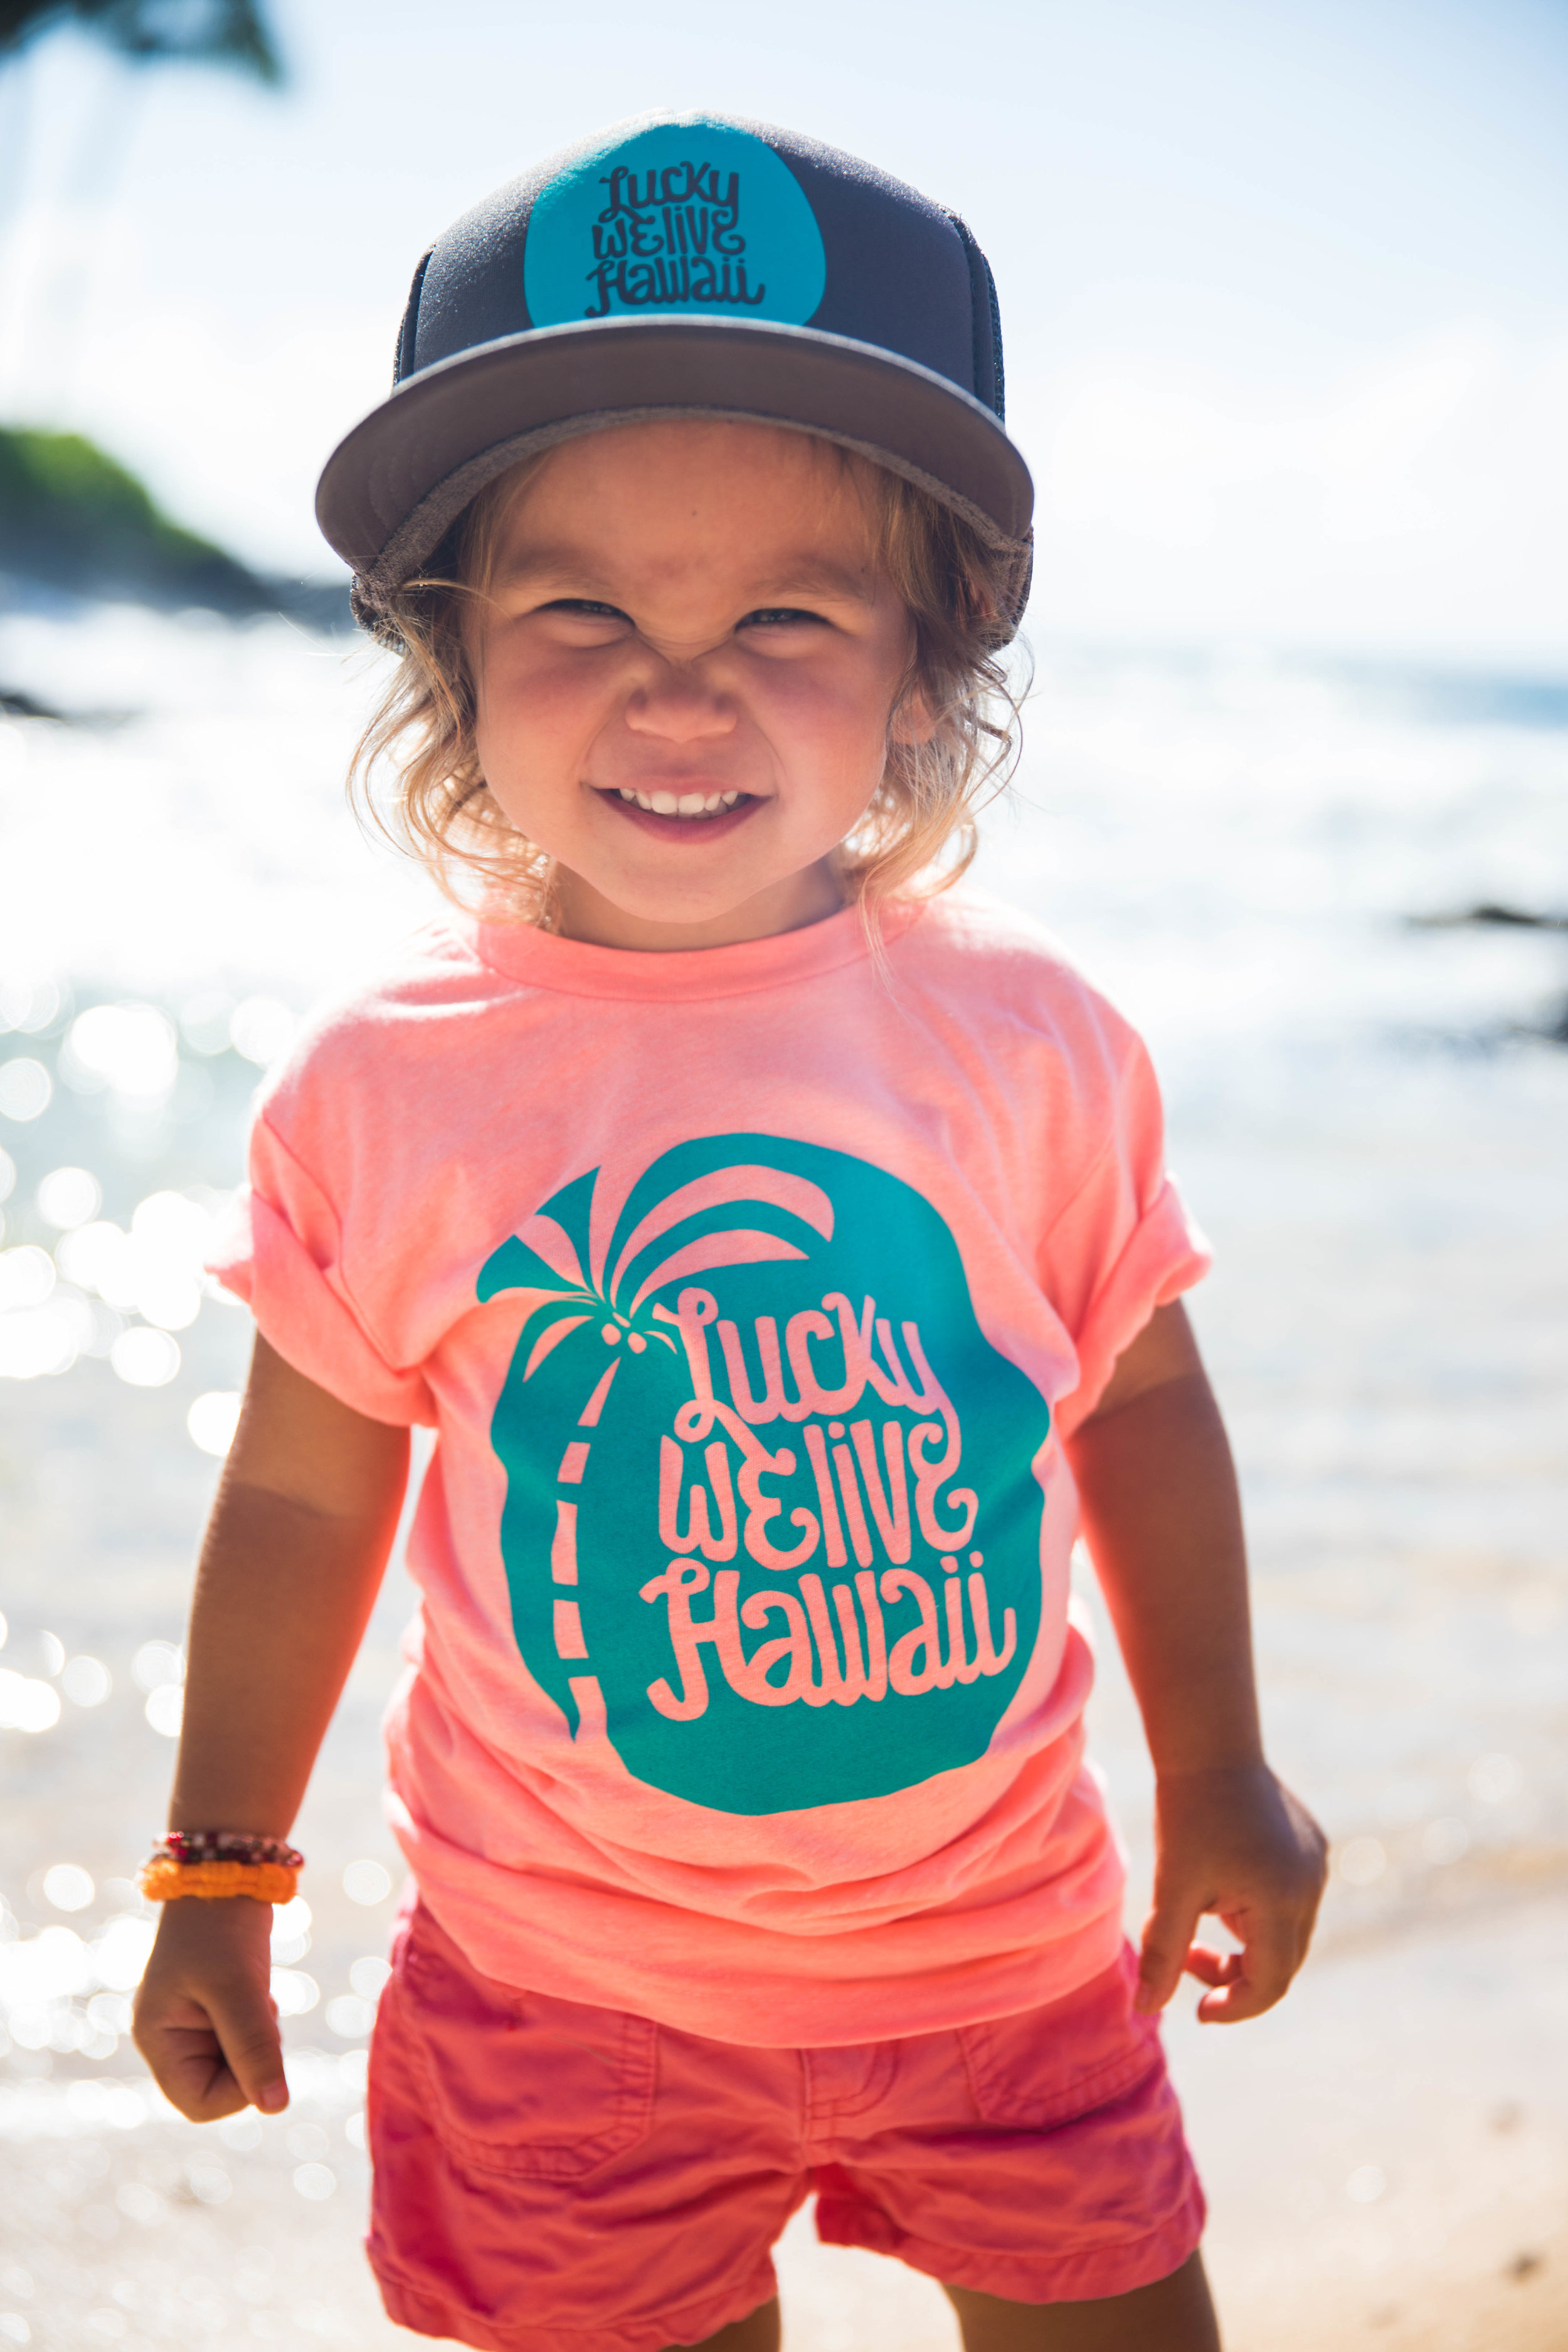 Keiki clothing and accessories - LWLH Infant & Youth Rainbow Trucker -  Lucky We Live Hawaii